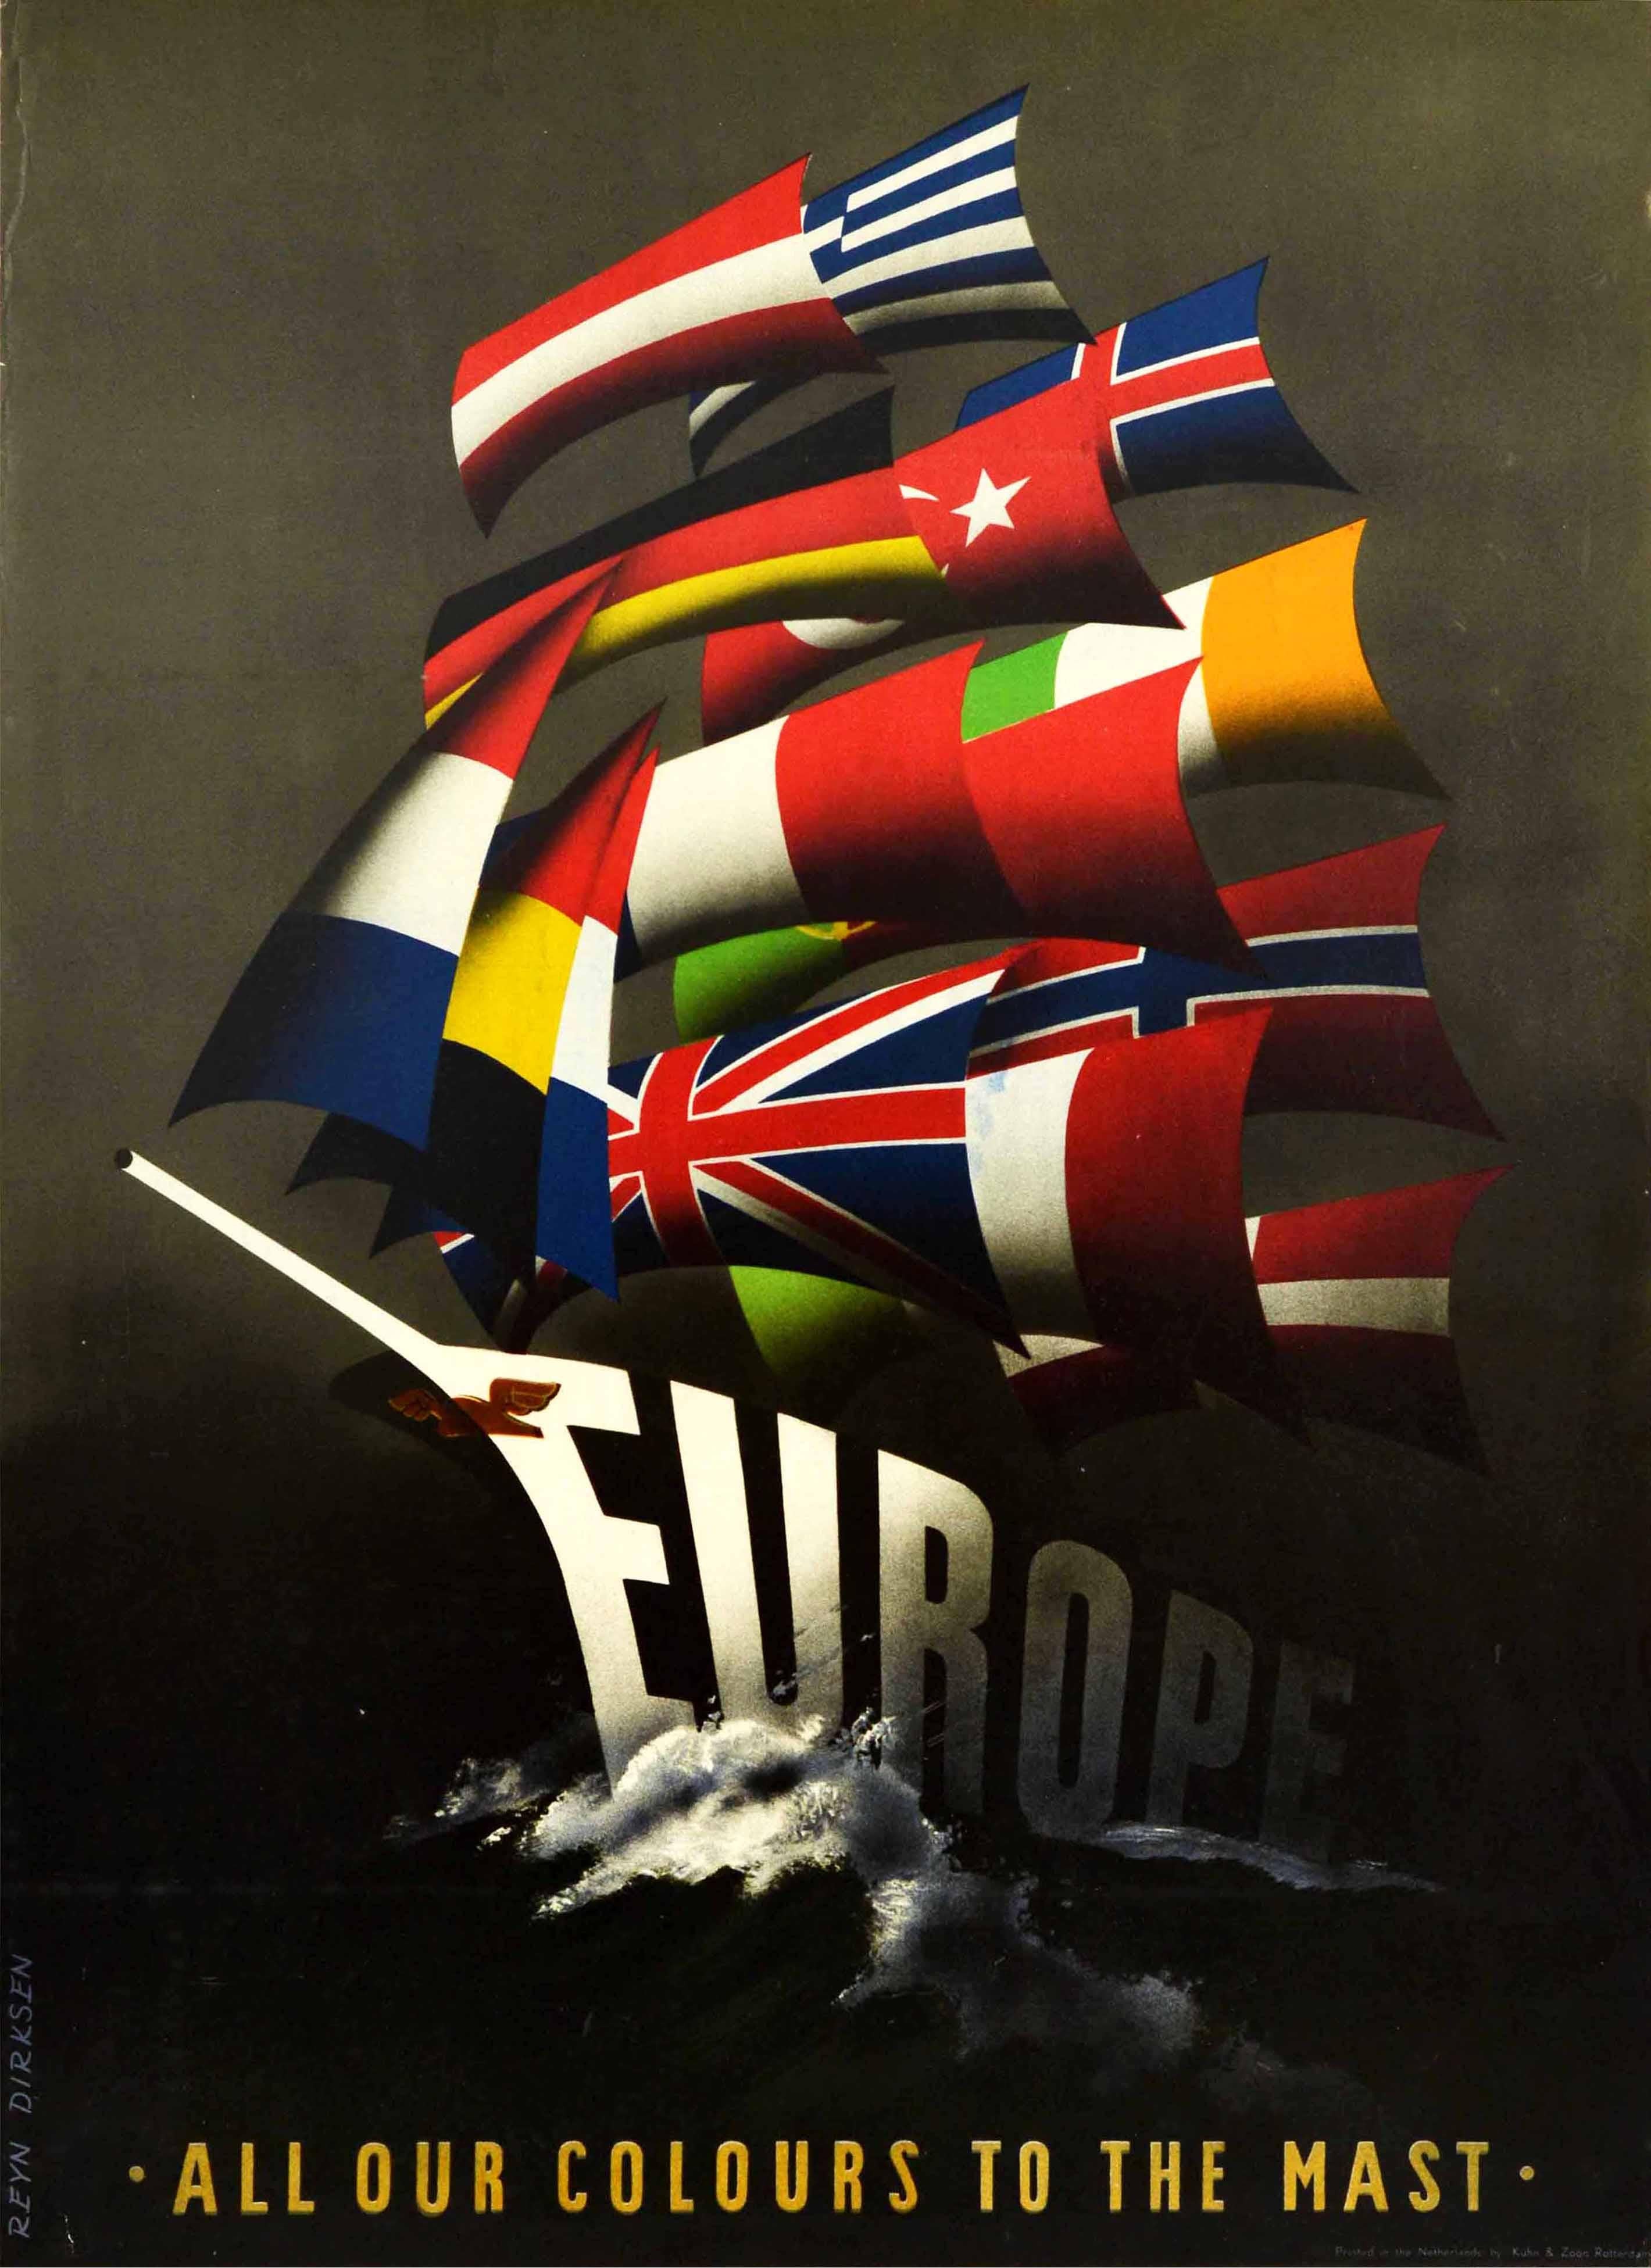 Reyn Dirksen Print - Original Vintage Poster Europe All Our Colours To The Mast ERP Marshall Plan